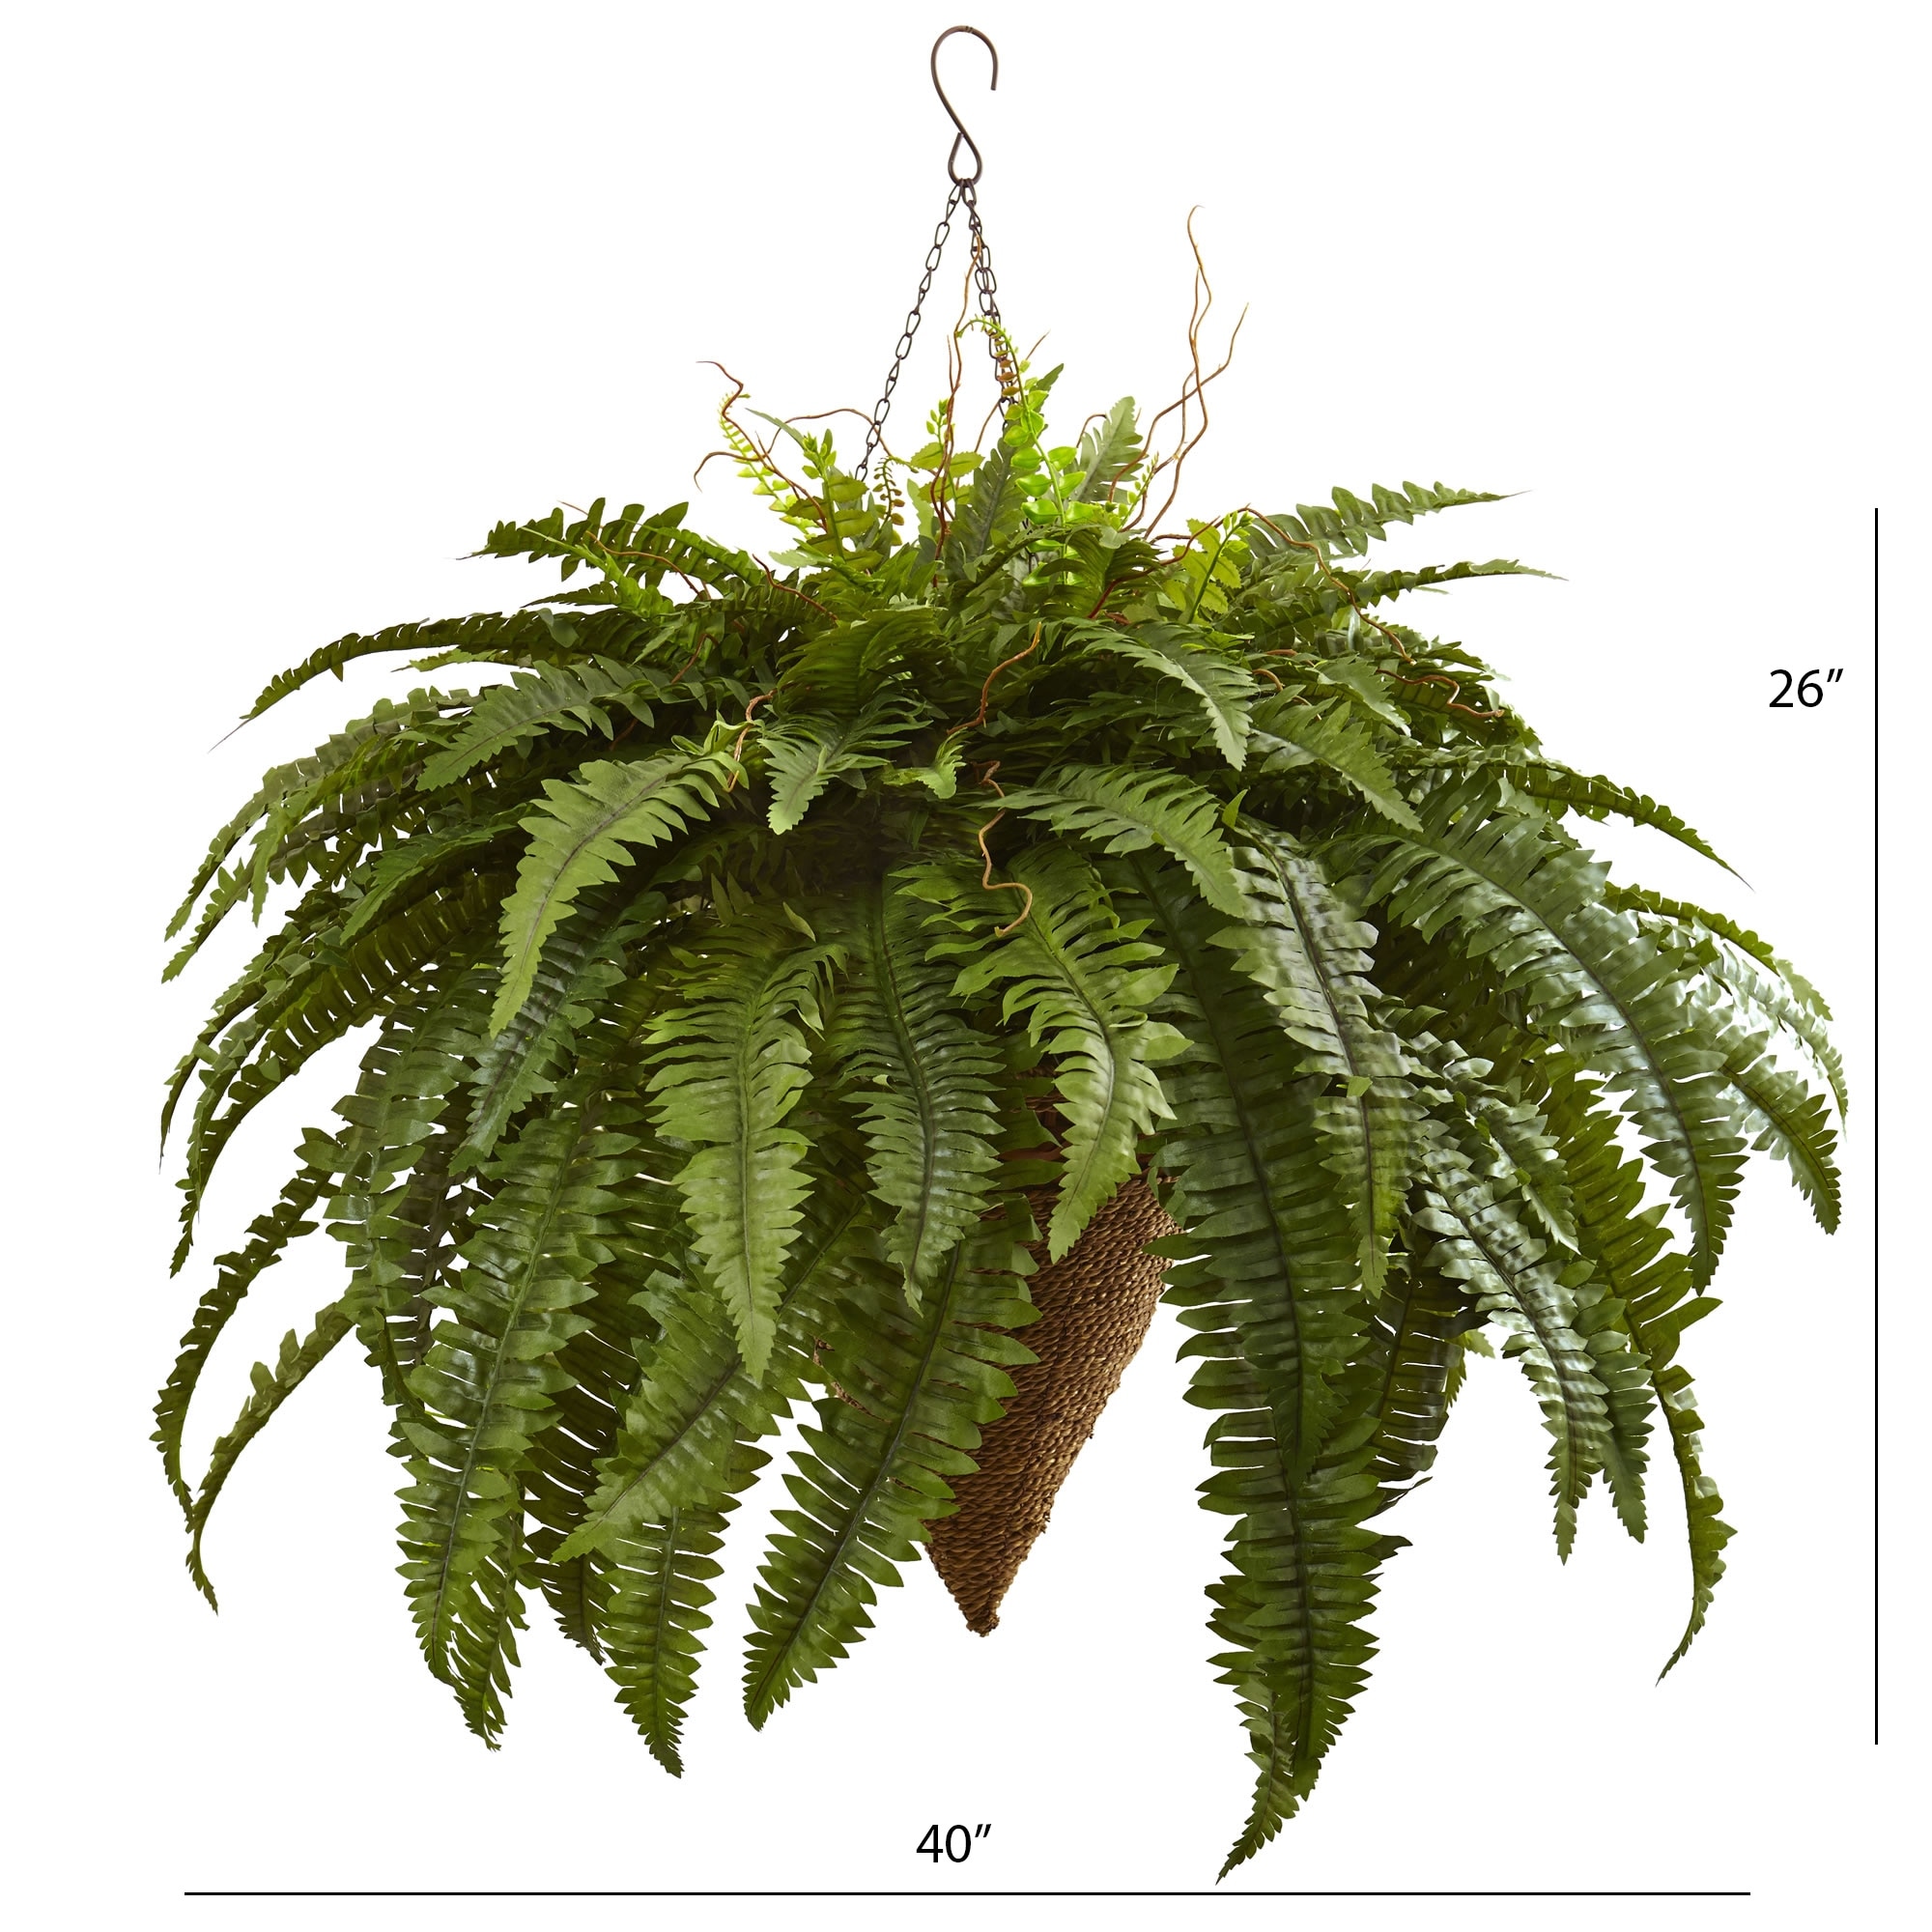 Nearly Natural Boston Fern with Decorative Wood Vase Silk Plant Green